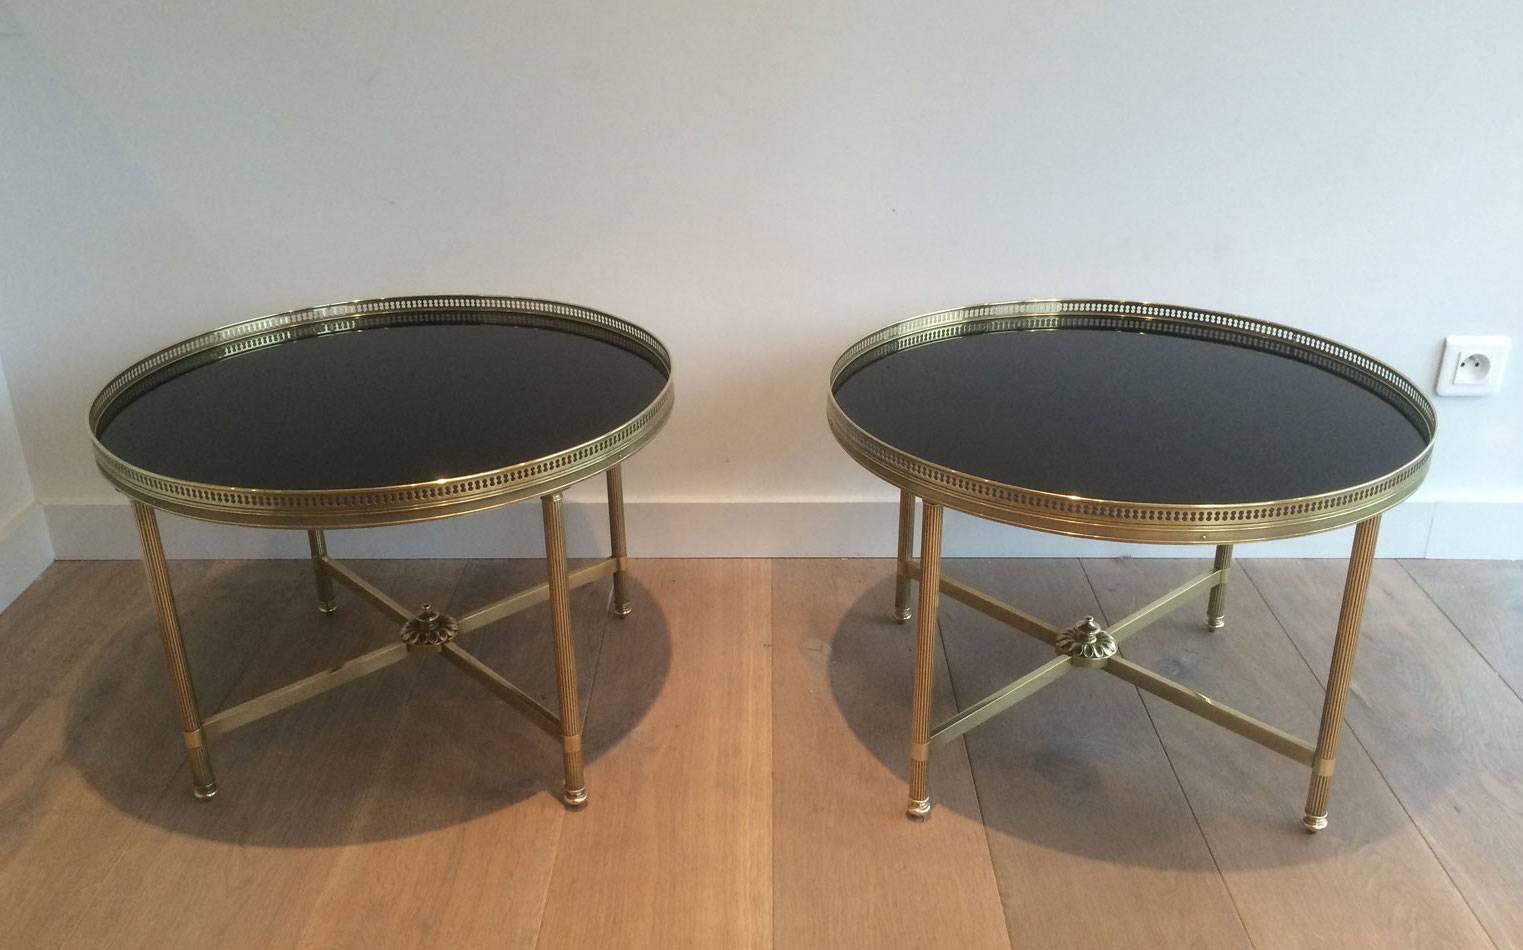 Pair of round brass end tables with black glass tops by Maison Jansen

These pieces are currently in France, please allow 4 to 6 weeks for delivery. Shipping to our warehouse in Long Island City, New York is included in the price.